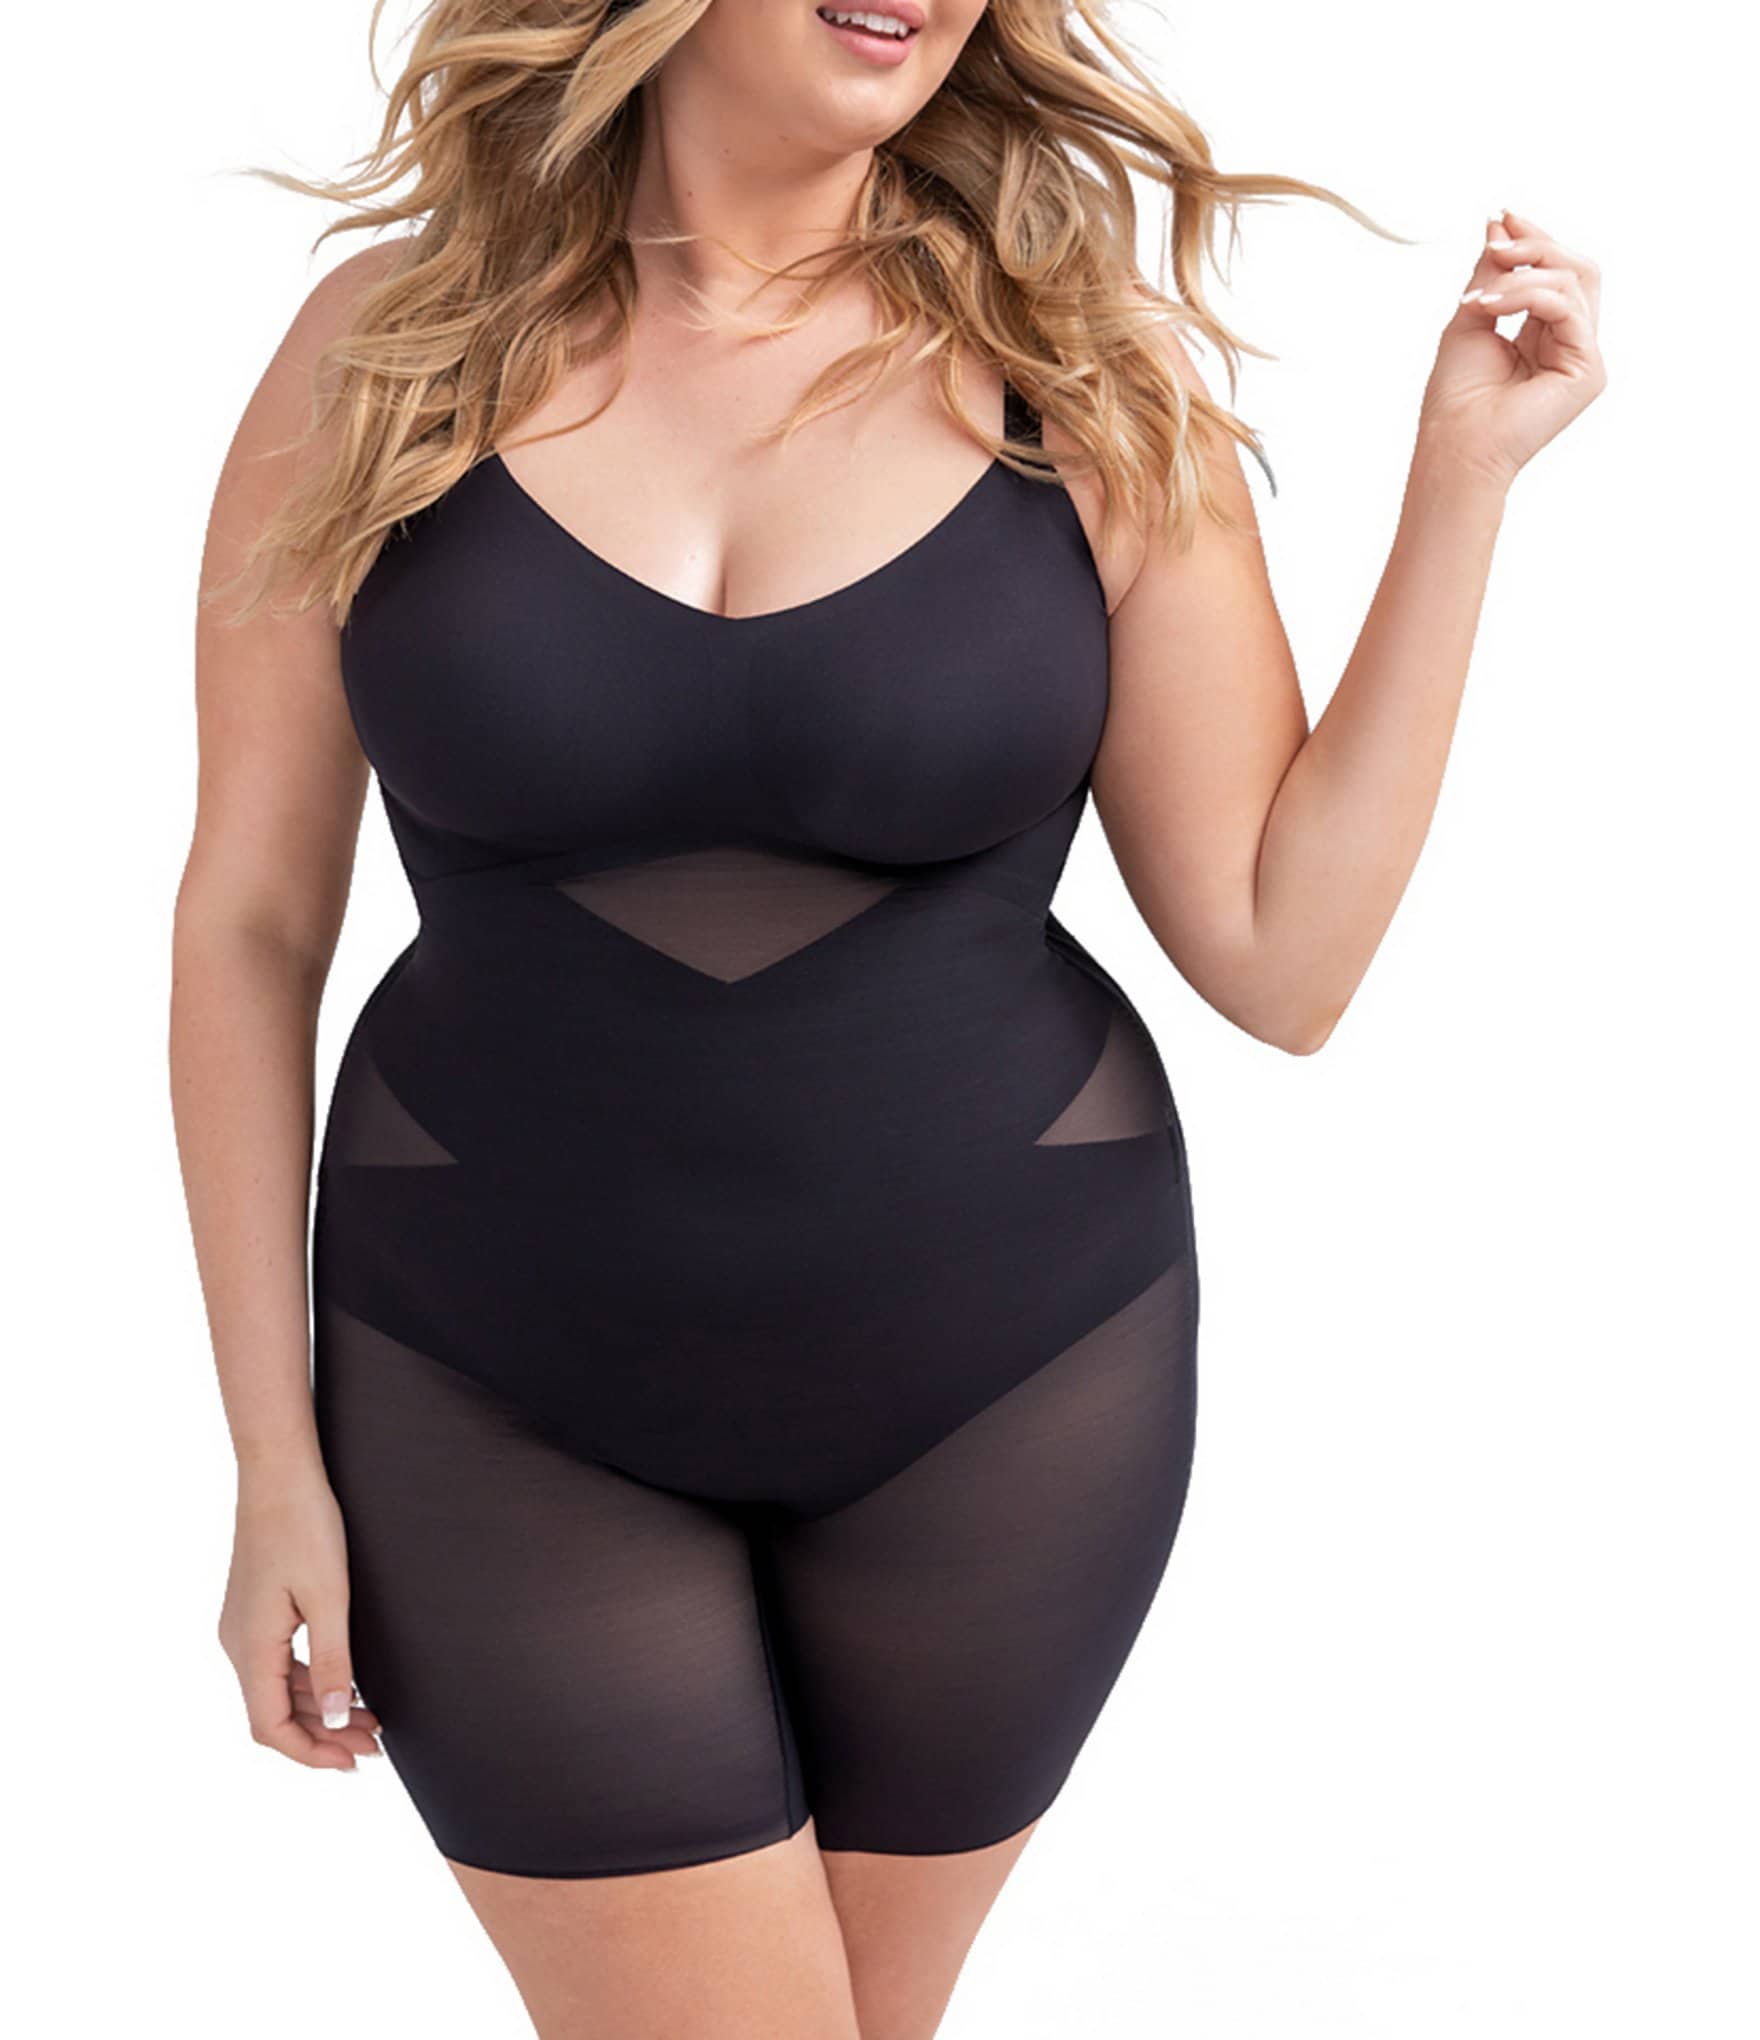 Honeylove - We just got the first plus size samples back